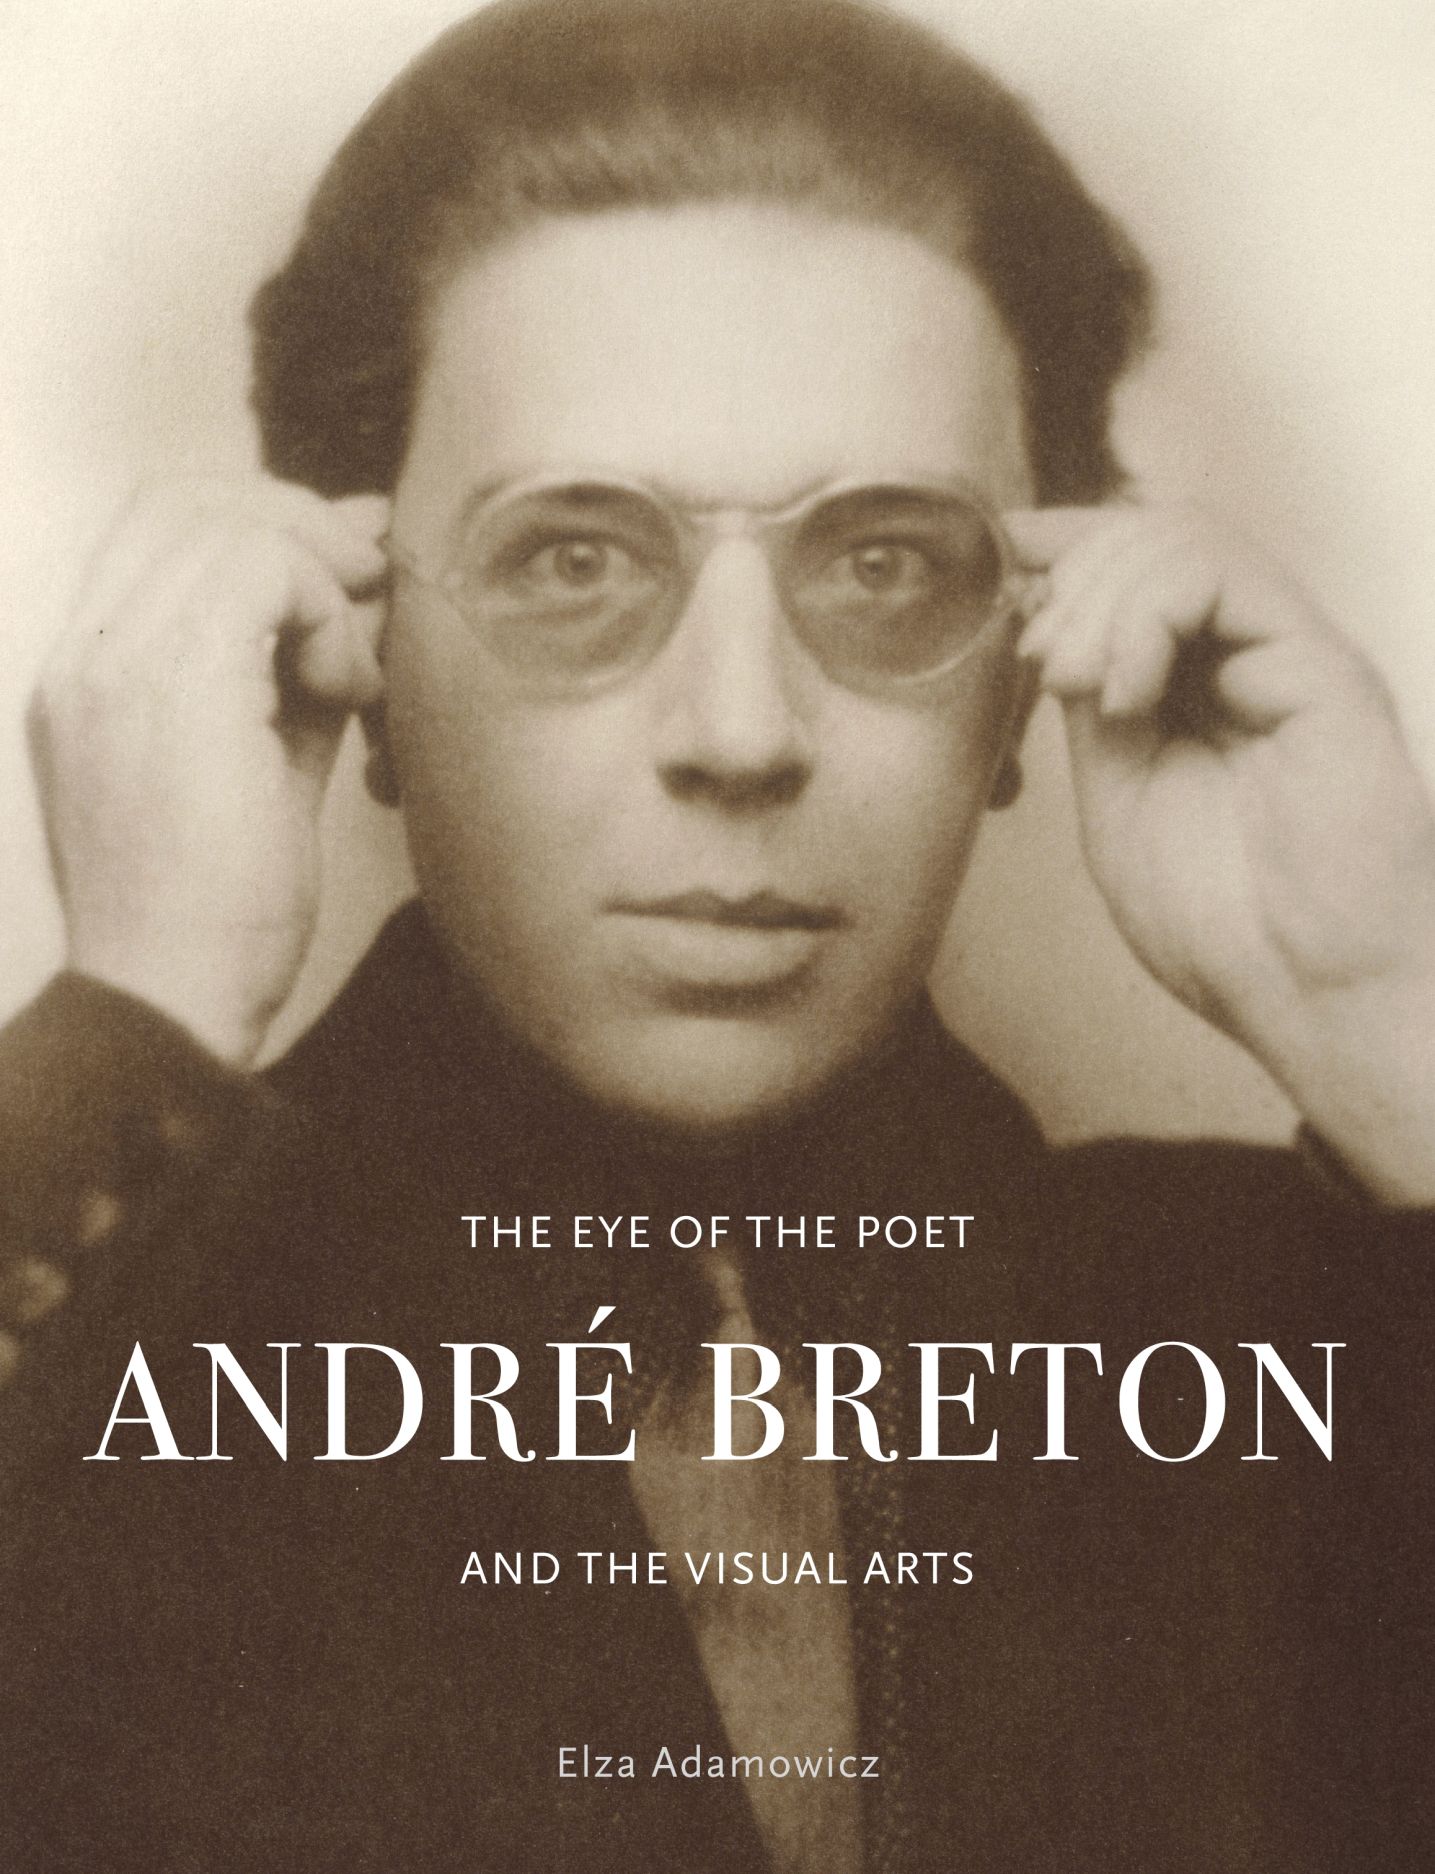 About André Breton  Academy of American Poets